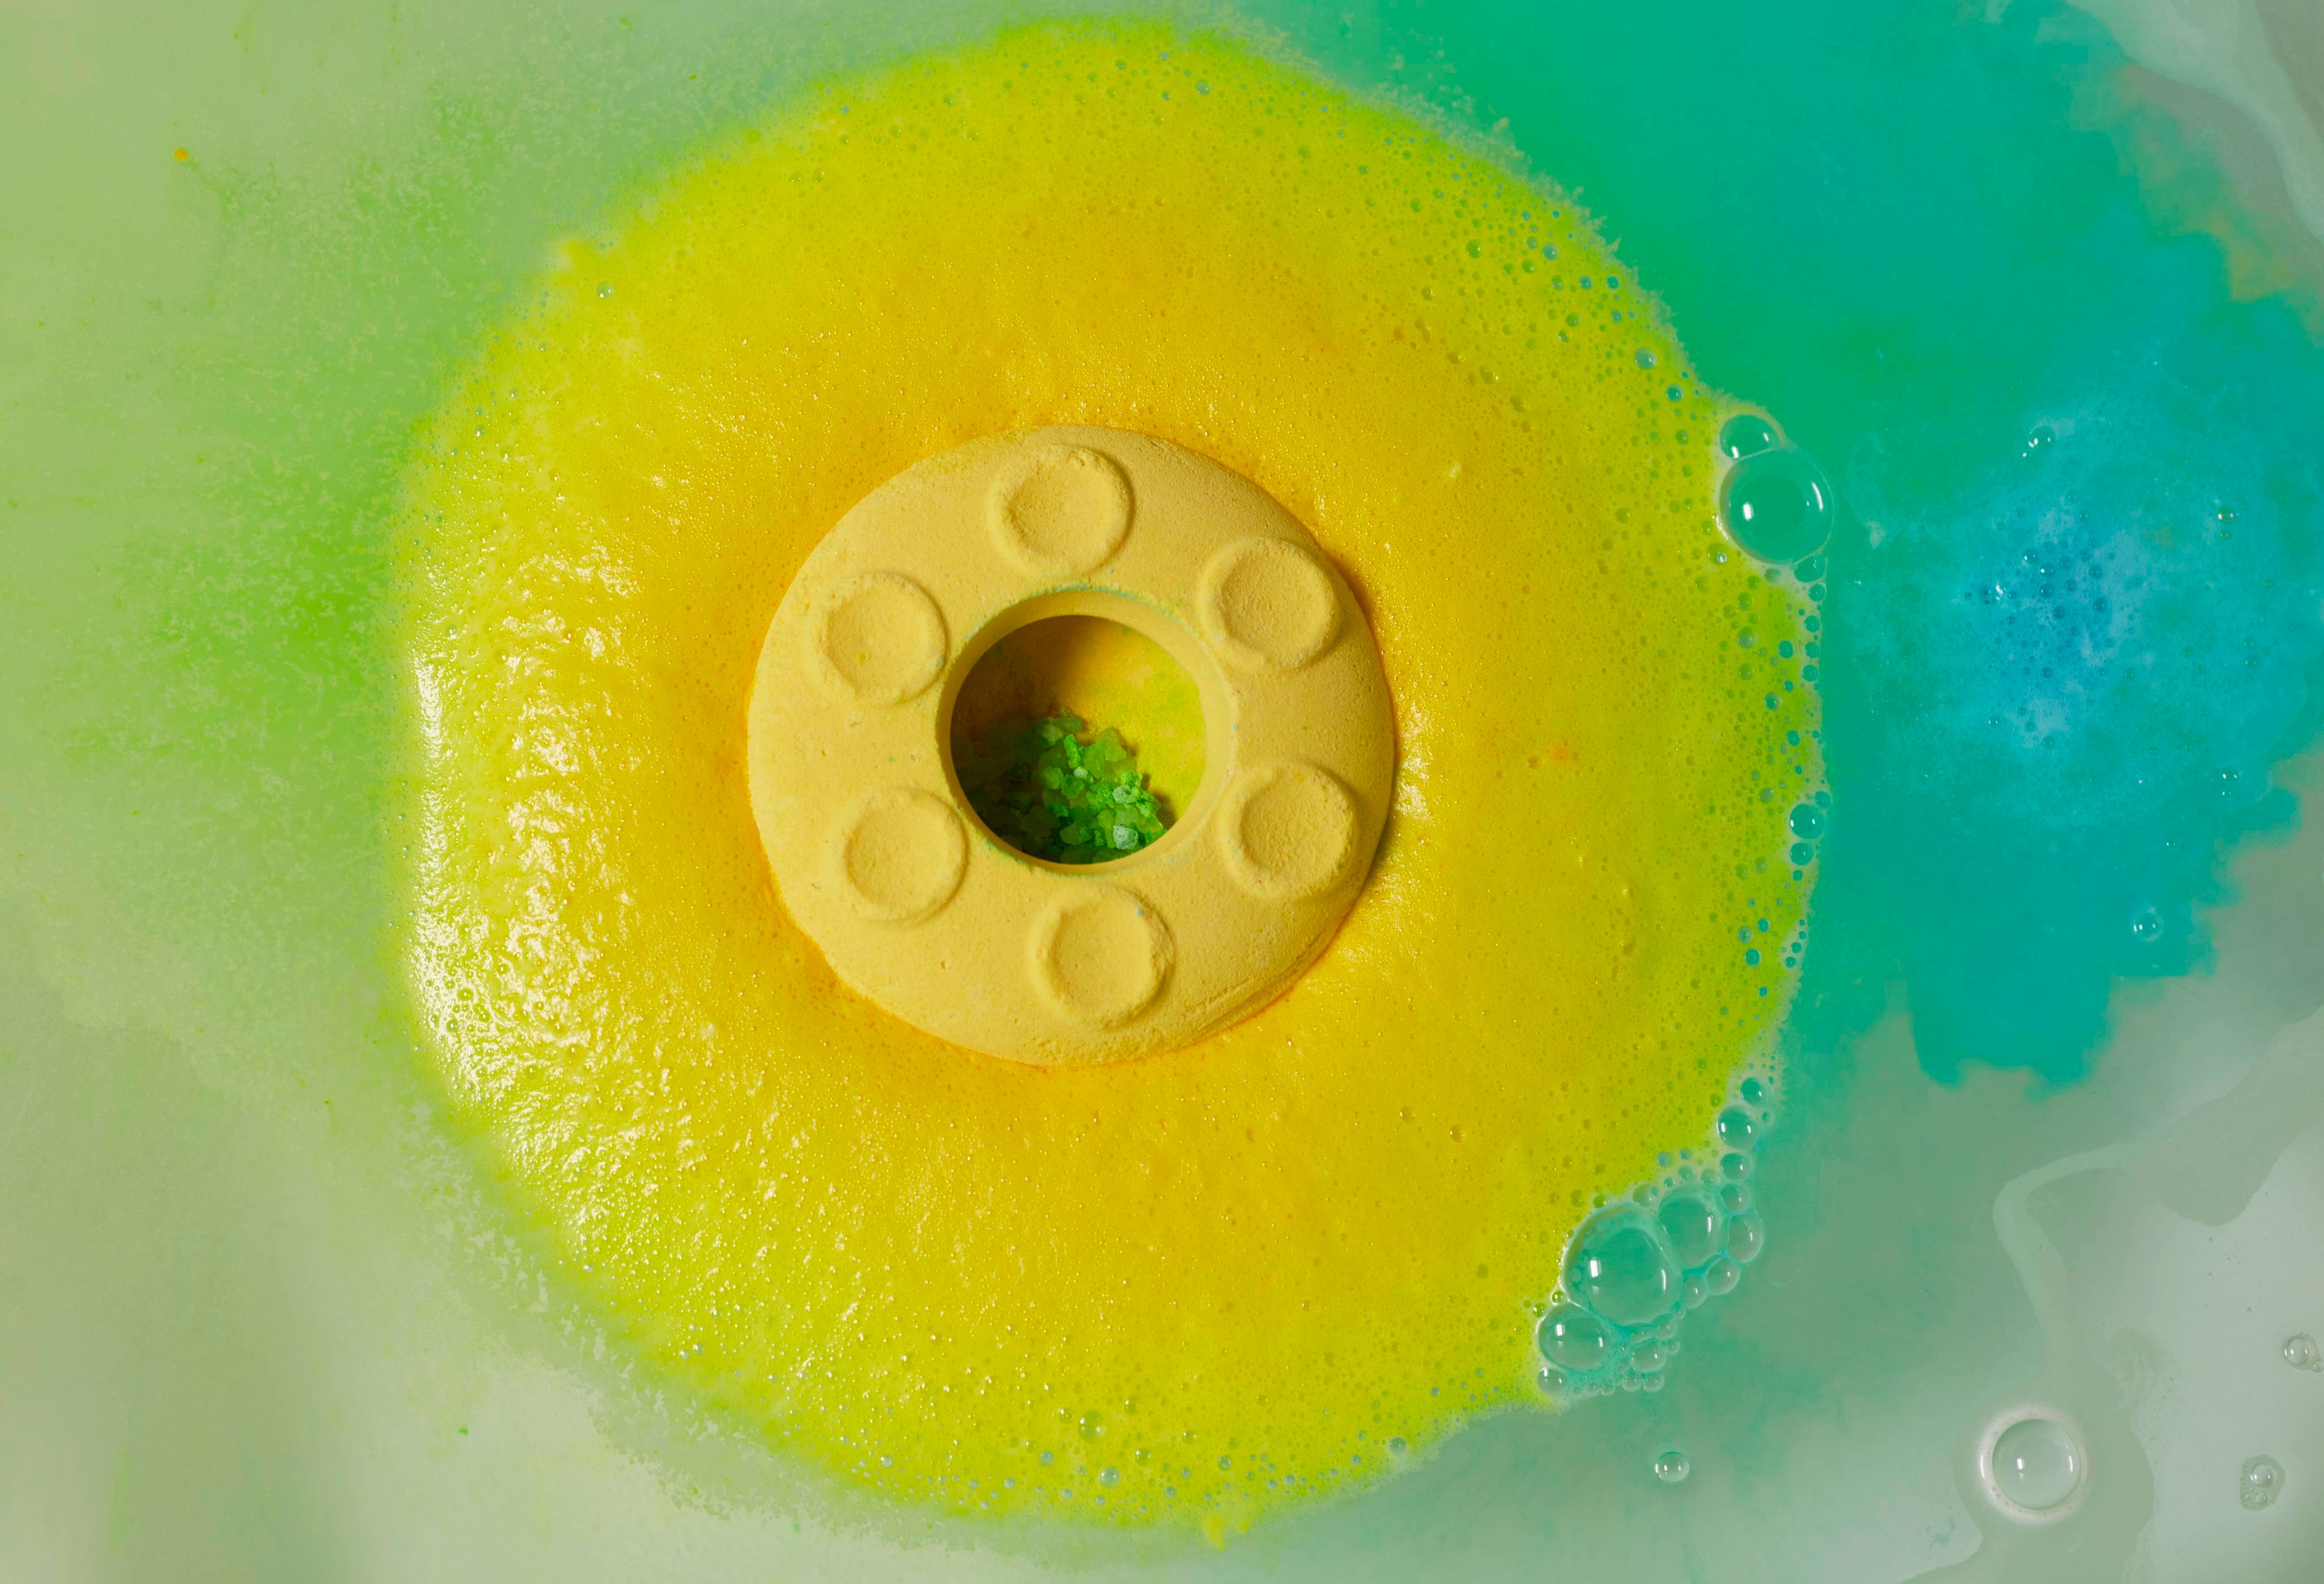 The circular UFO bath bomb floats on the water surrounded by yellow foam. Inside the hollow bath bomb are green salt crystals.